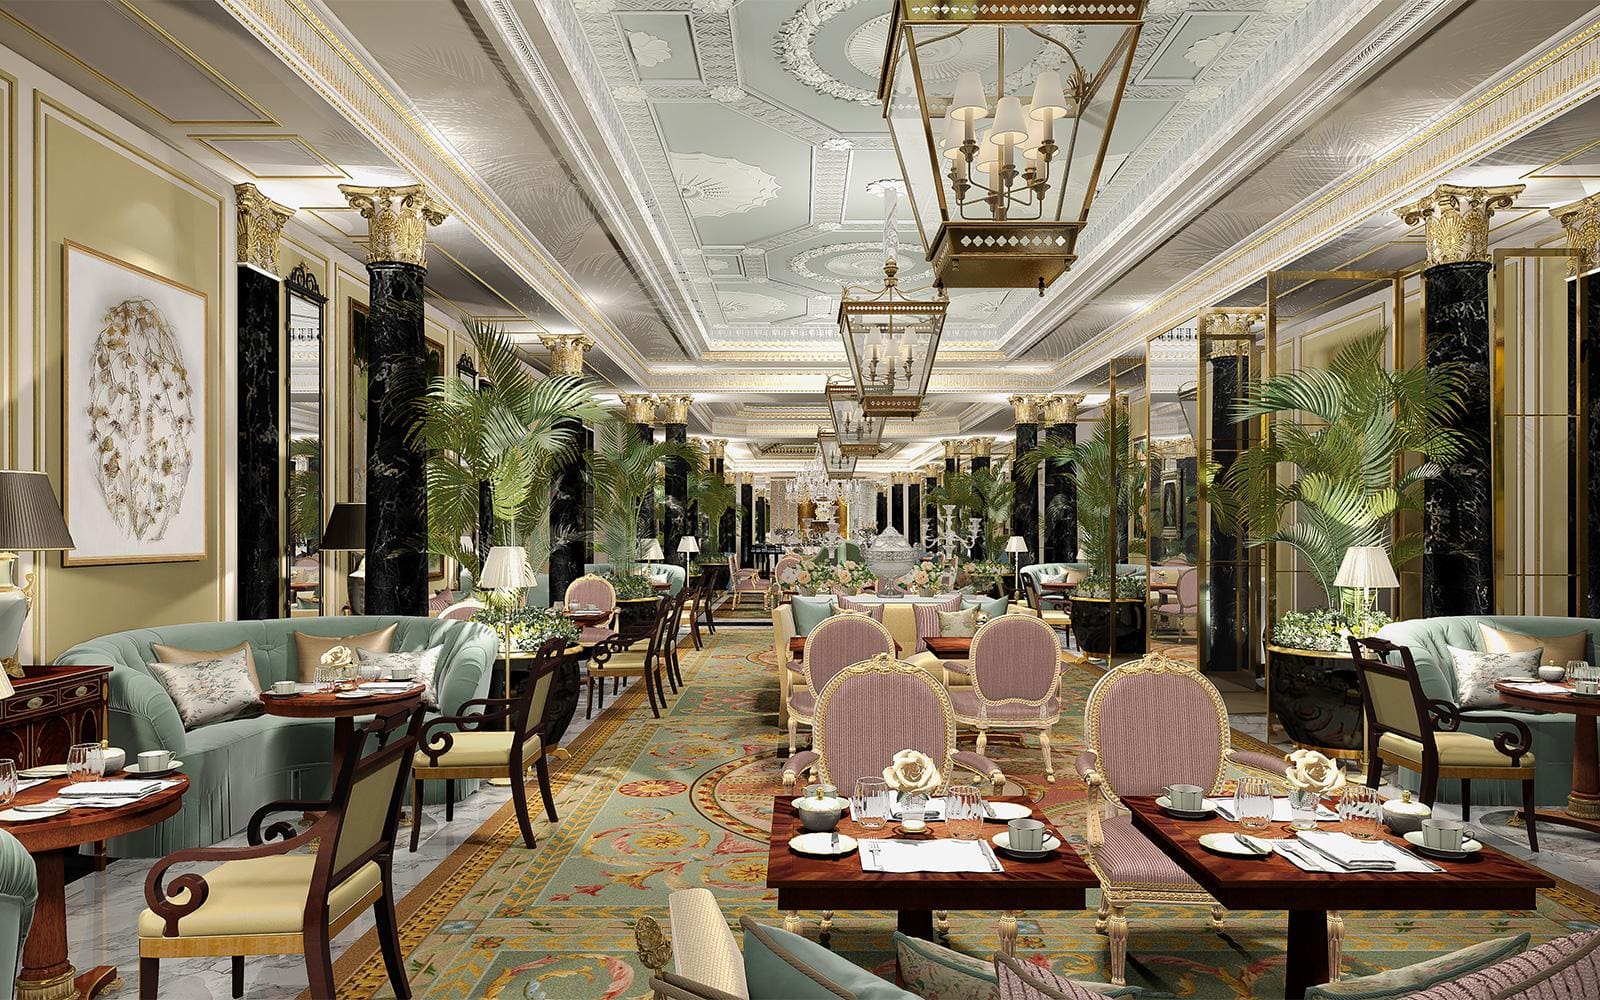 The Dorchester's New Suites Update London Glamour - Hemispheres